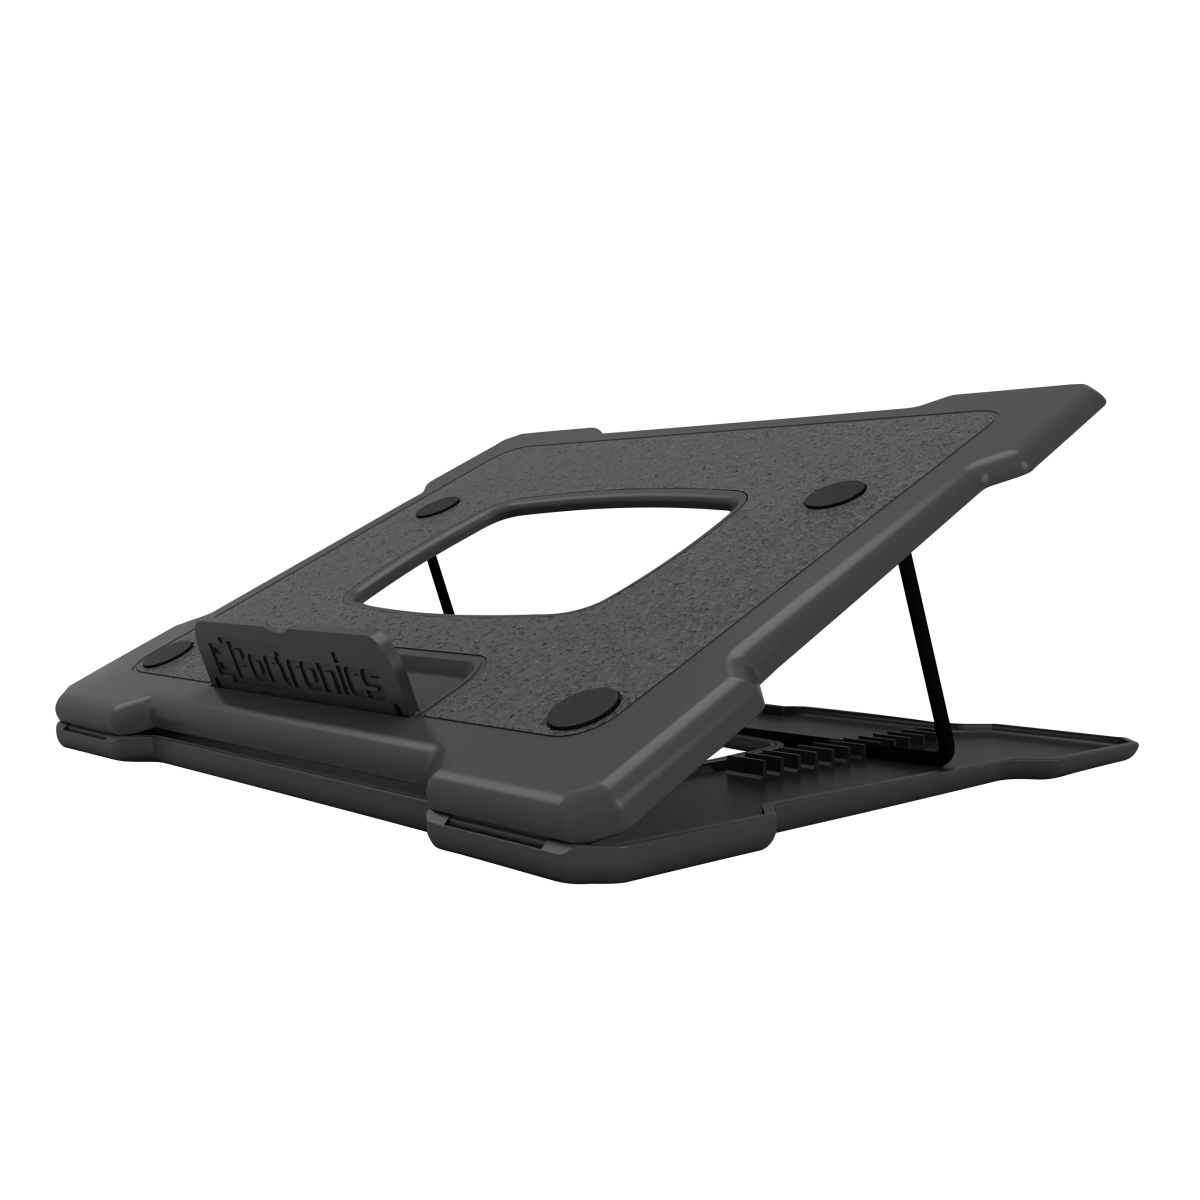 Portronics My Buddy Hexa Iii Portable Foldable Laptop Stand Air Ventilated Height Adjustment(black)